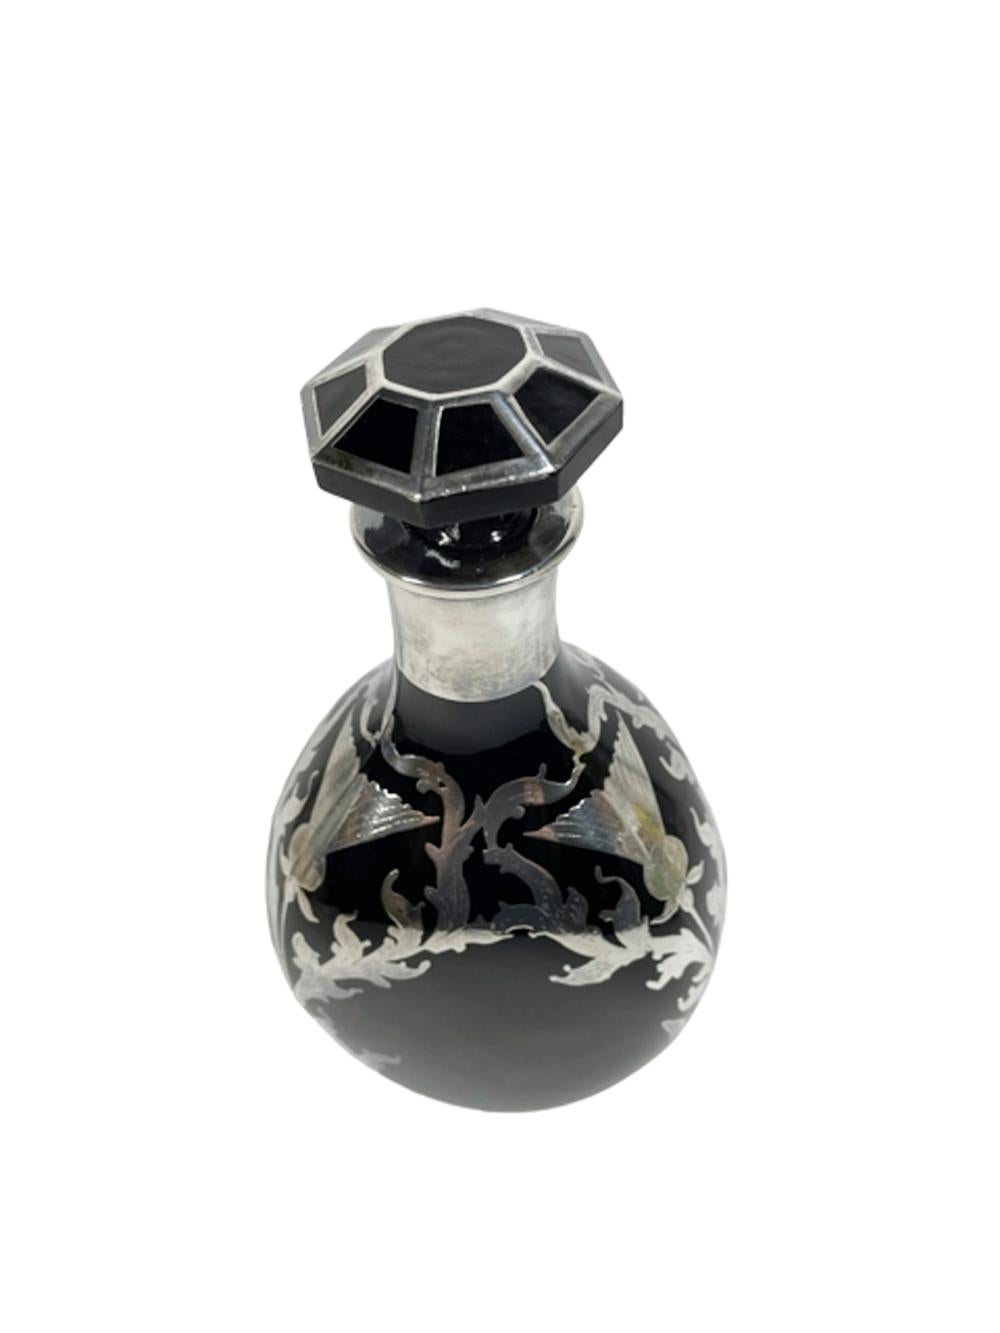 American Art Deco Thistle Pattern Silver Overlay on Onyx Glass Pinch Decanter For Sale